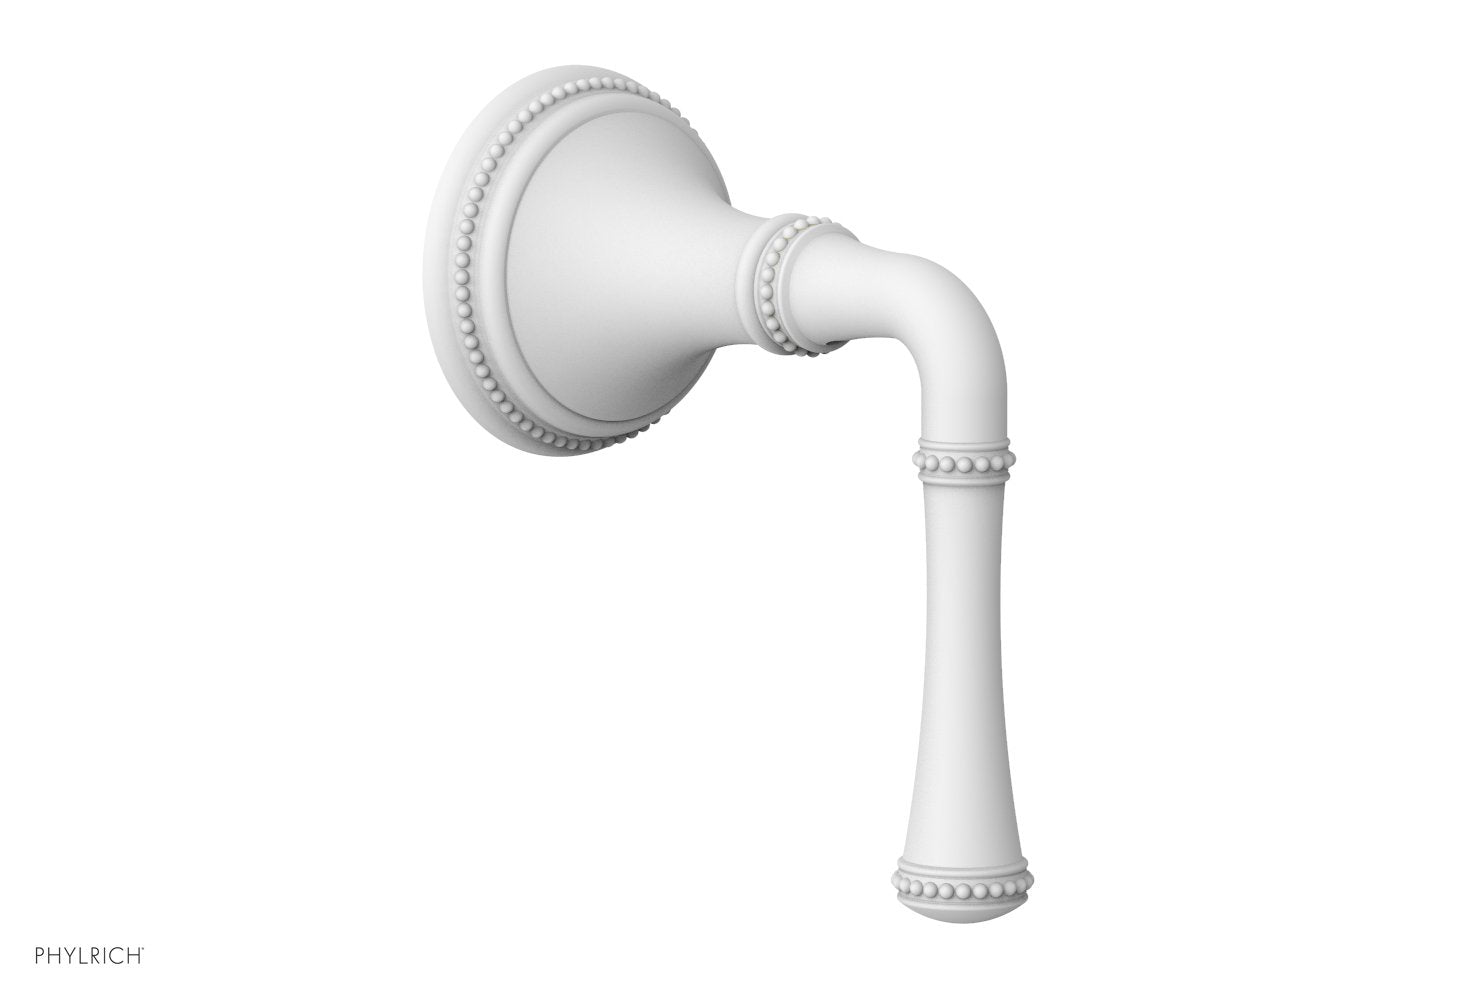 Phylrich BEADED Volume Control/Diverter Trim -Lever Handle